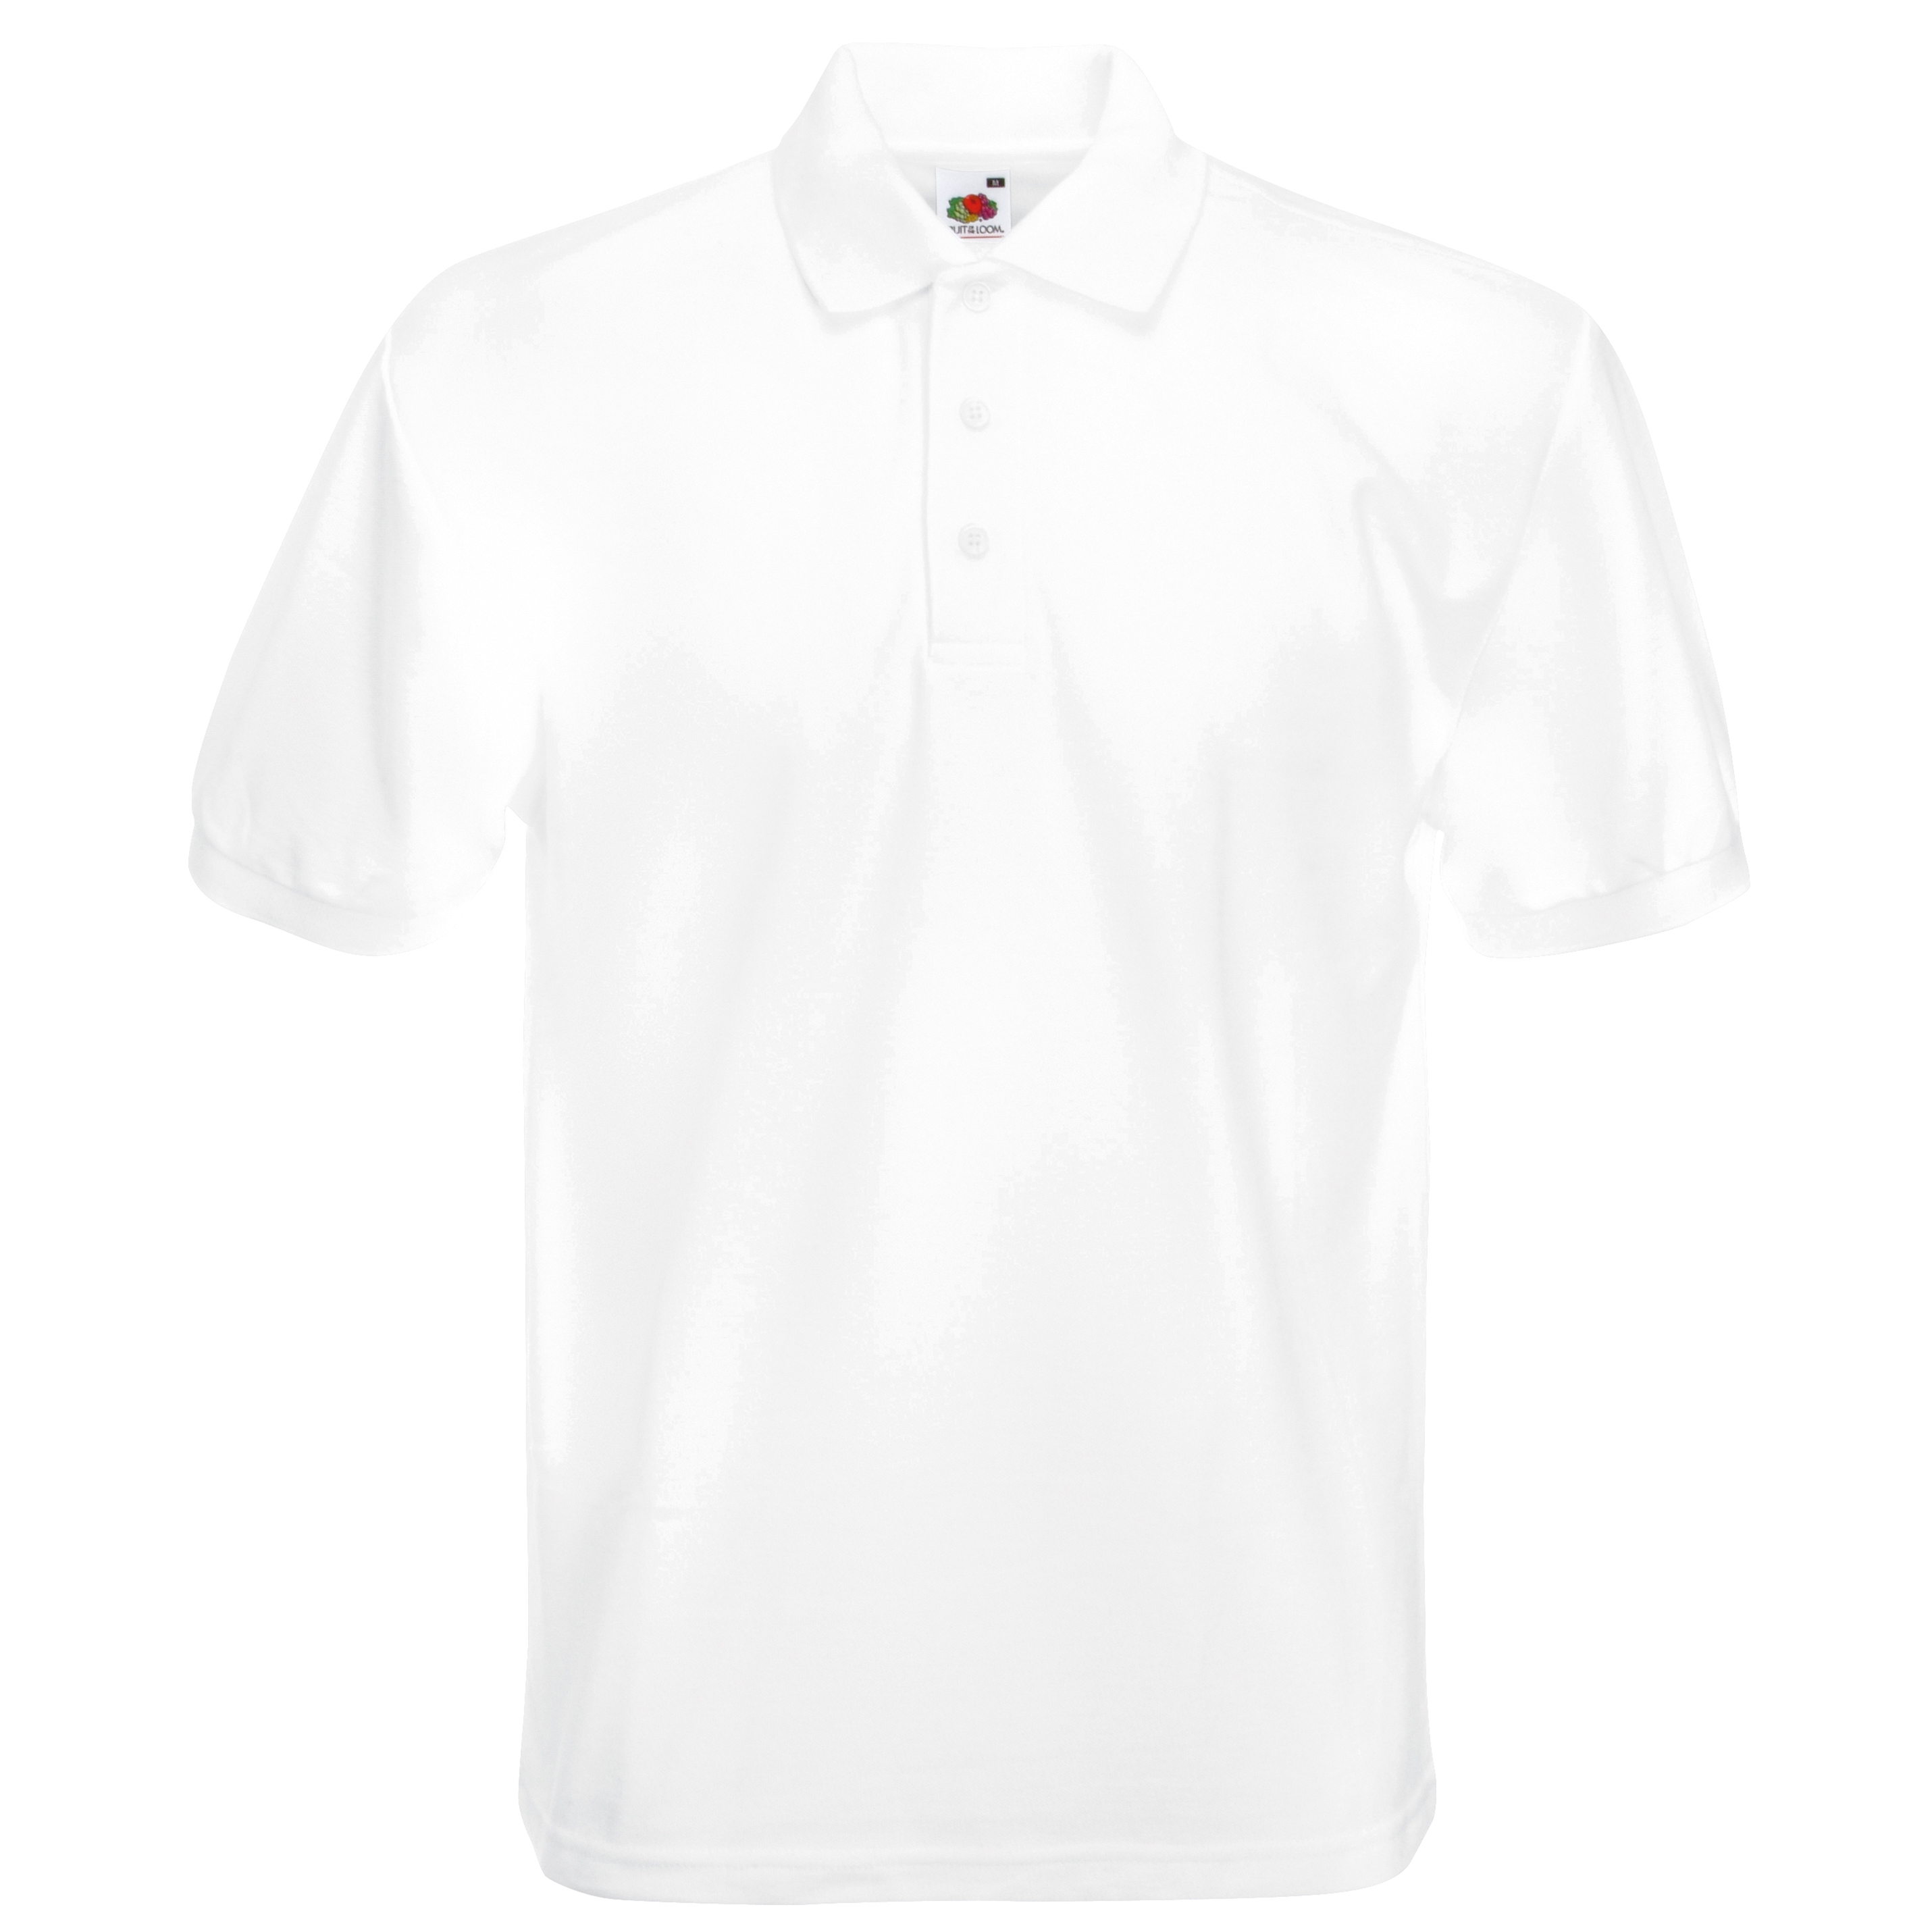 ax-httpswebsystems.s3.amazonaws.comtmp_for_downloadfruit-of-the-loom-heavyweight-65-35-polo-white.jpg